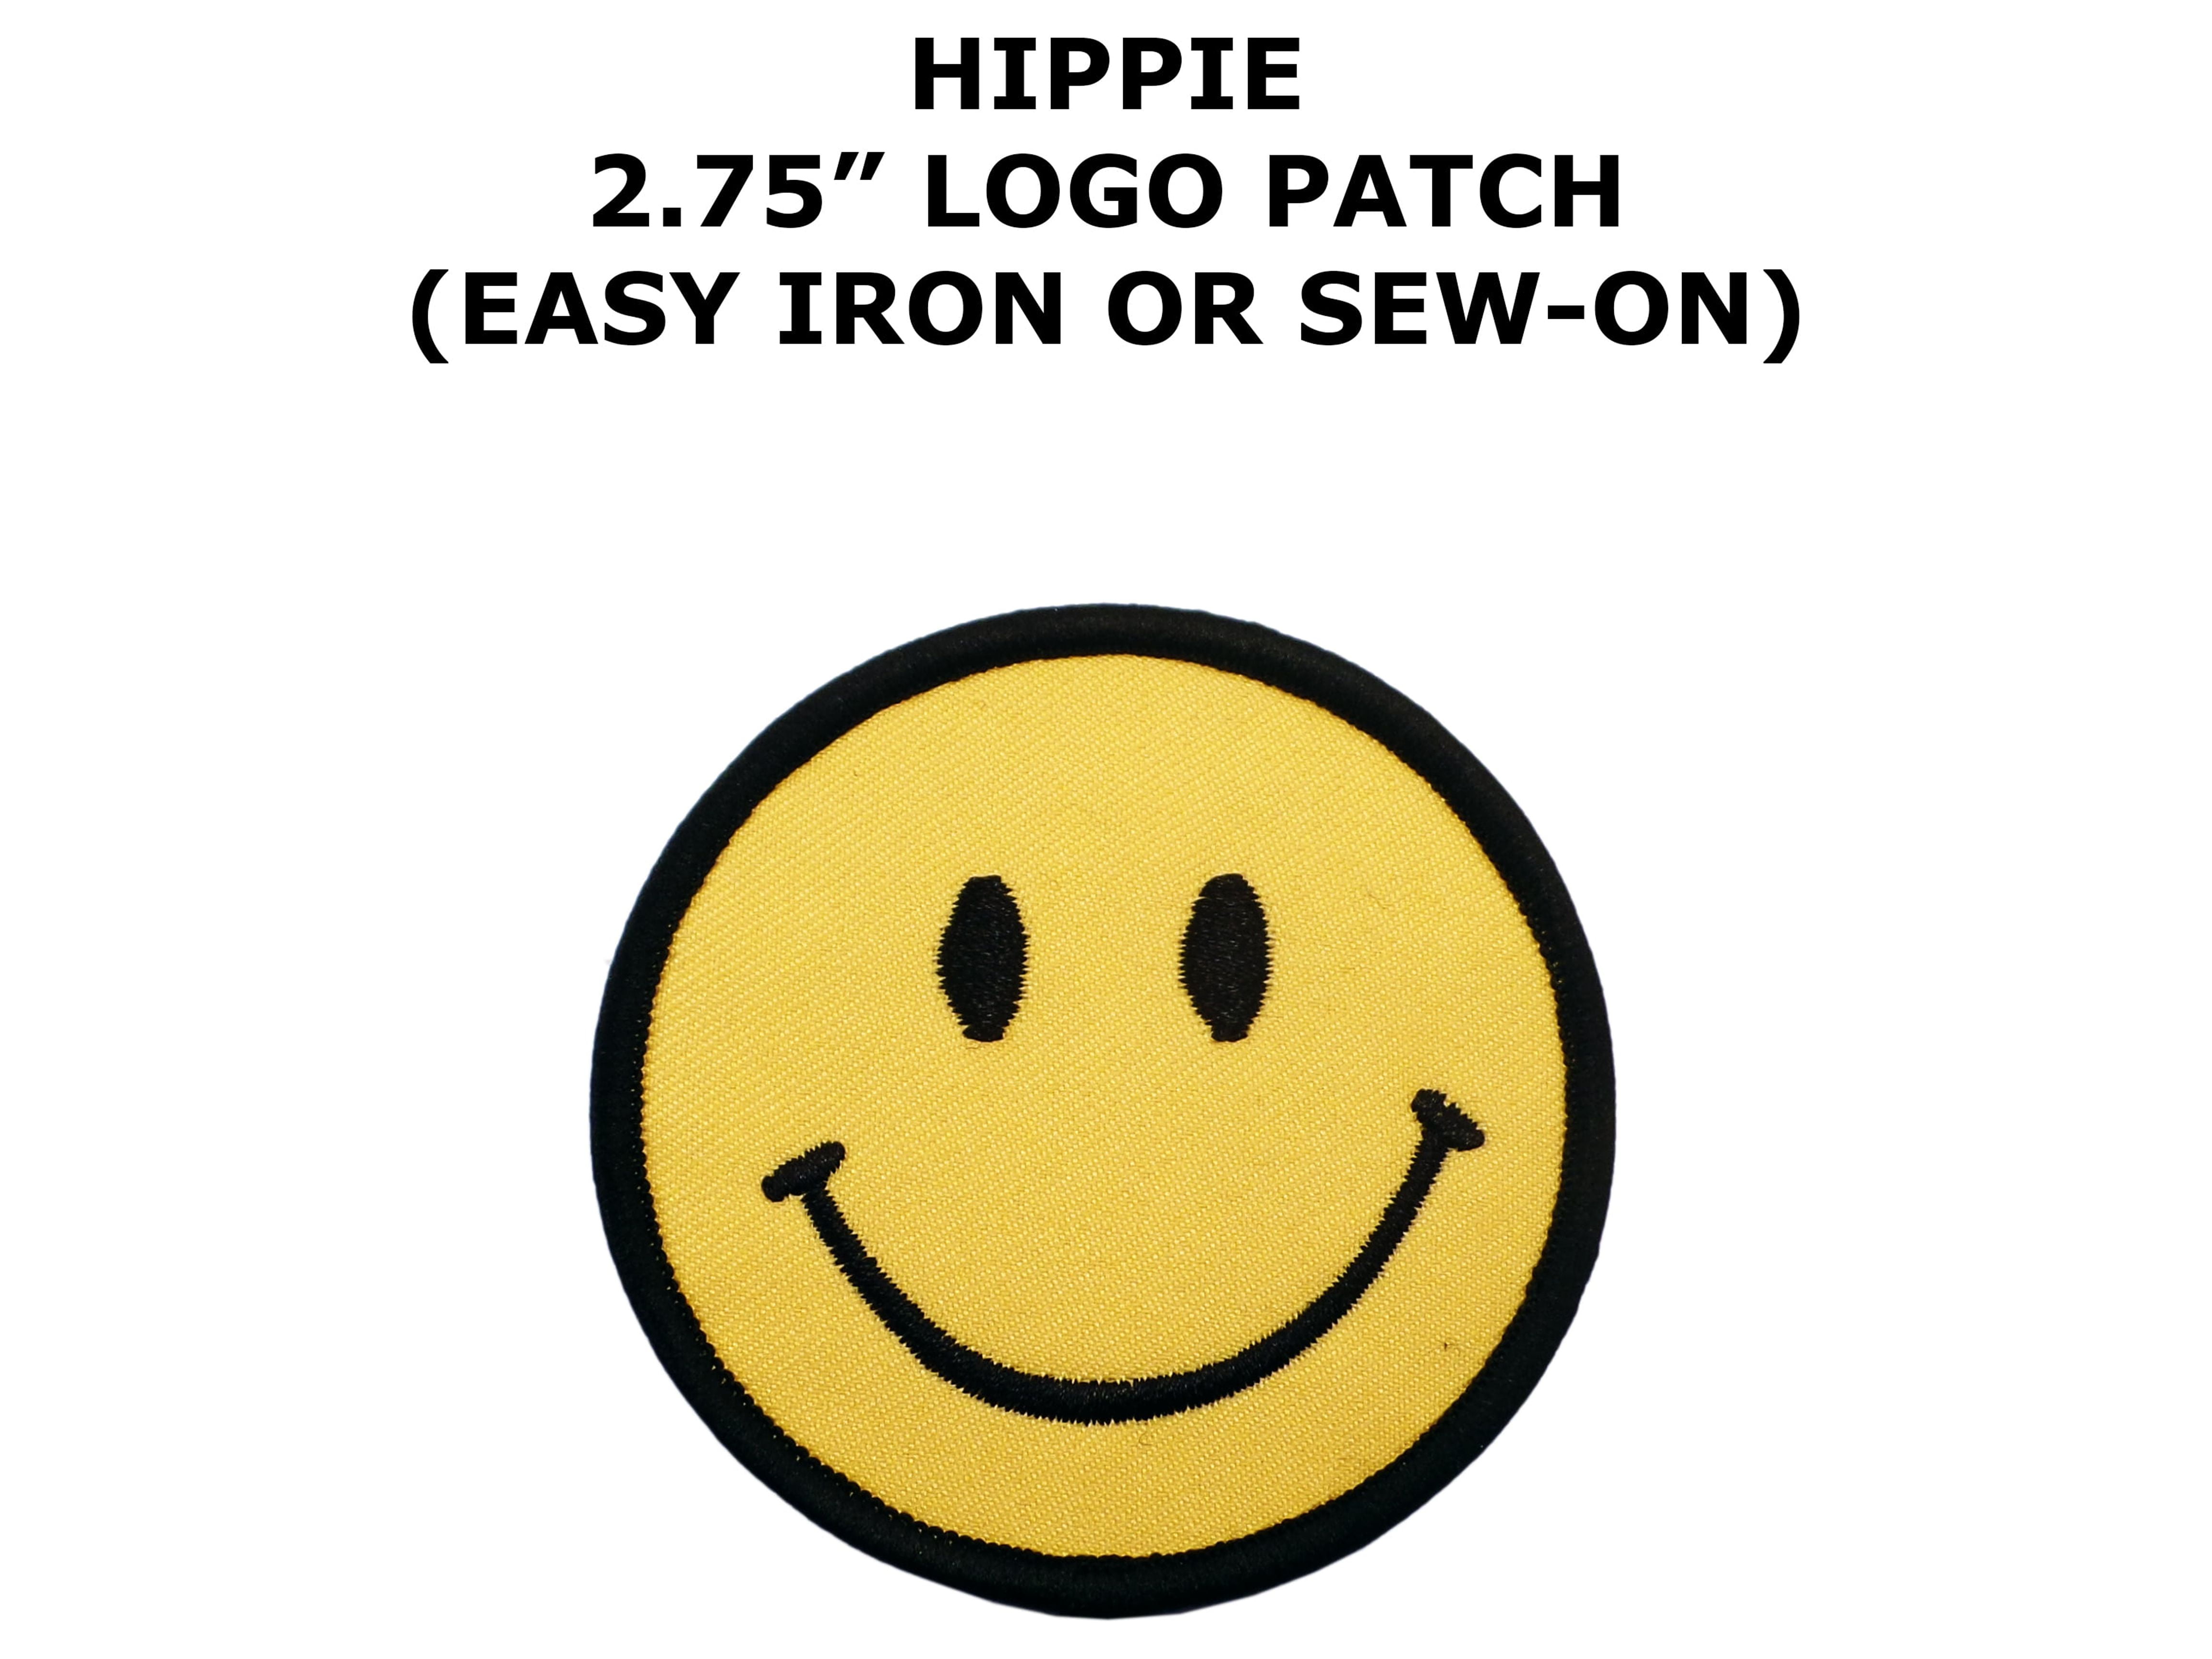 Application Smiley Face Head Shot Embroidered Patch By Superheroes 